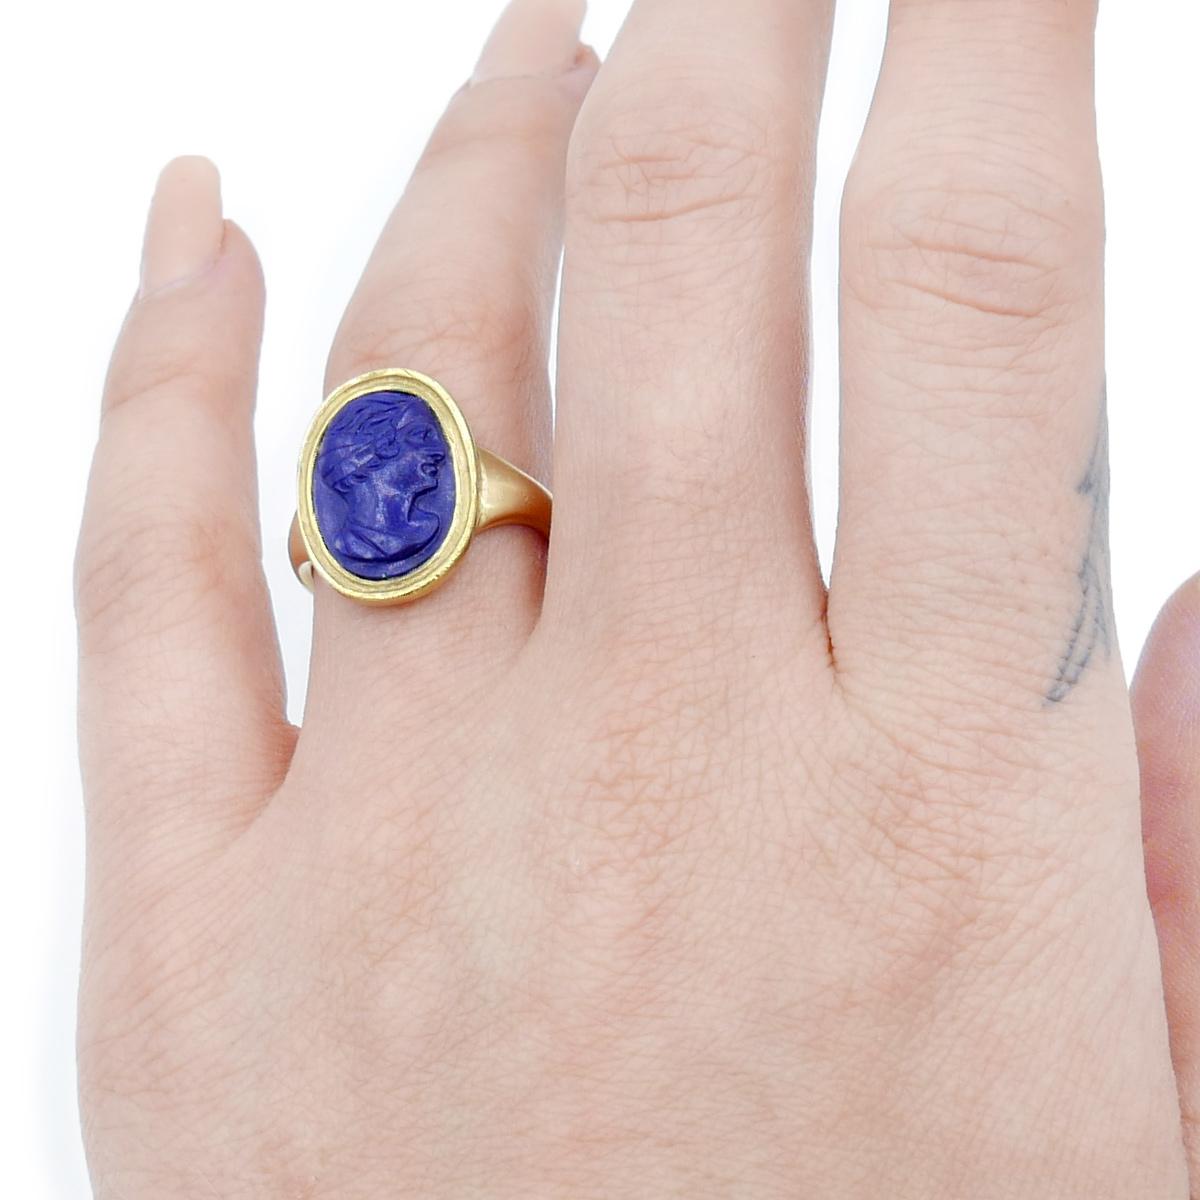 Antique 22k Yellow Gold Carved Lapis Cameo Ring Depicting Apollo, 18th Century Carving set in a later 22 karat yellow gold mounting.
Size 6.5